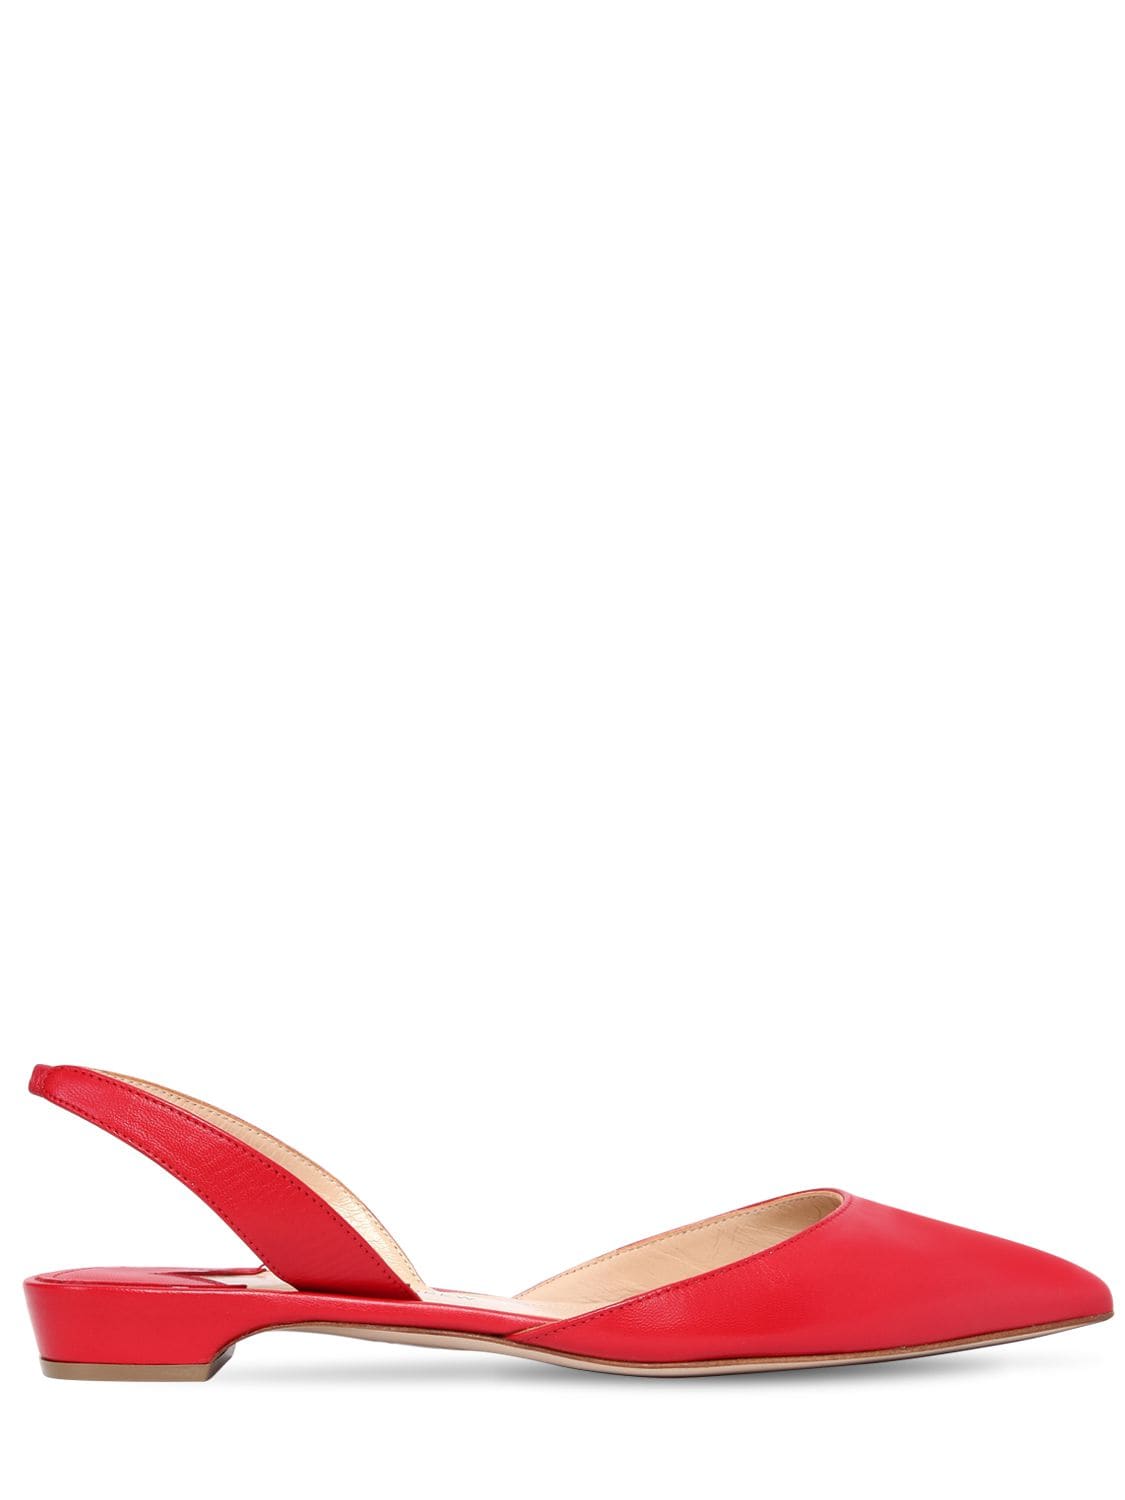 Paul Andrew 15mm Rhea Leather Slingback Flats In Red